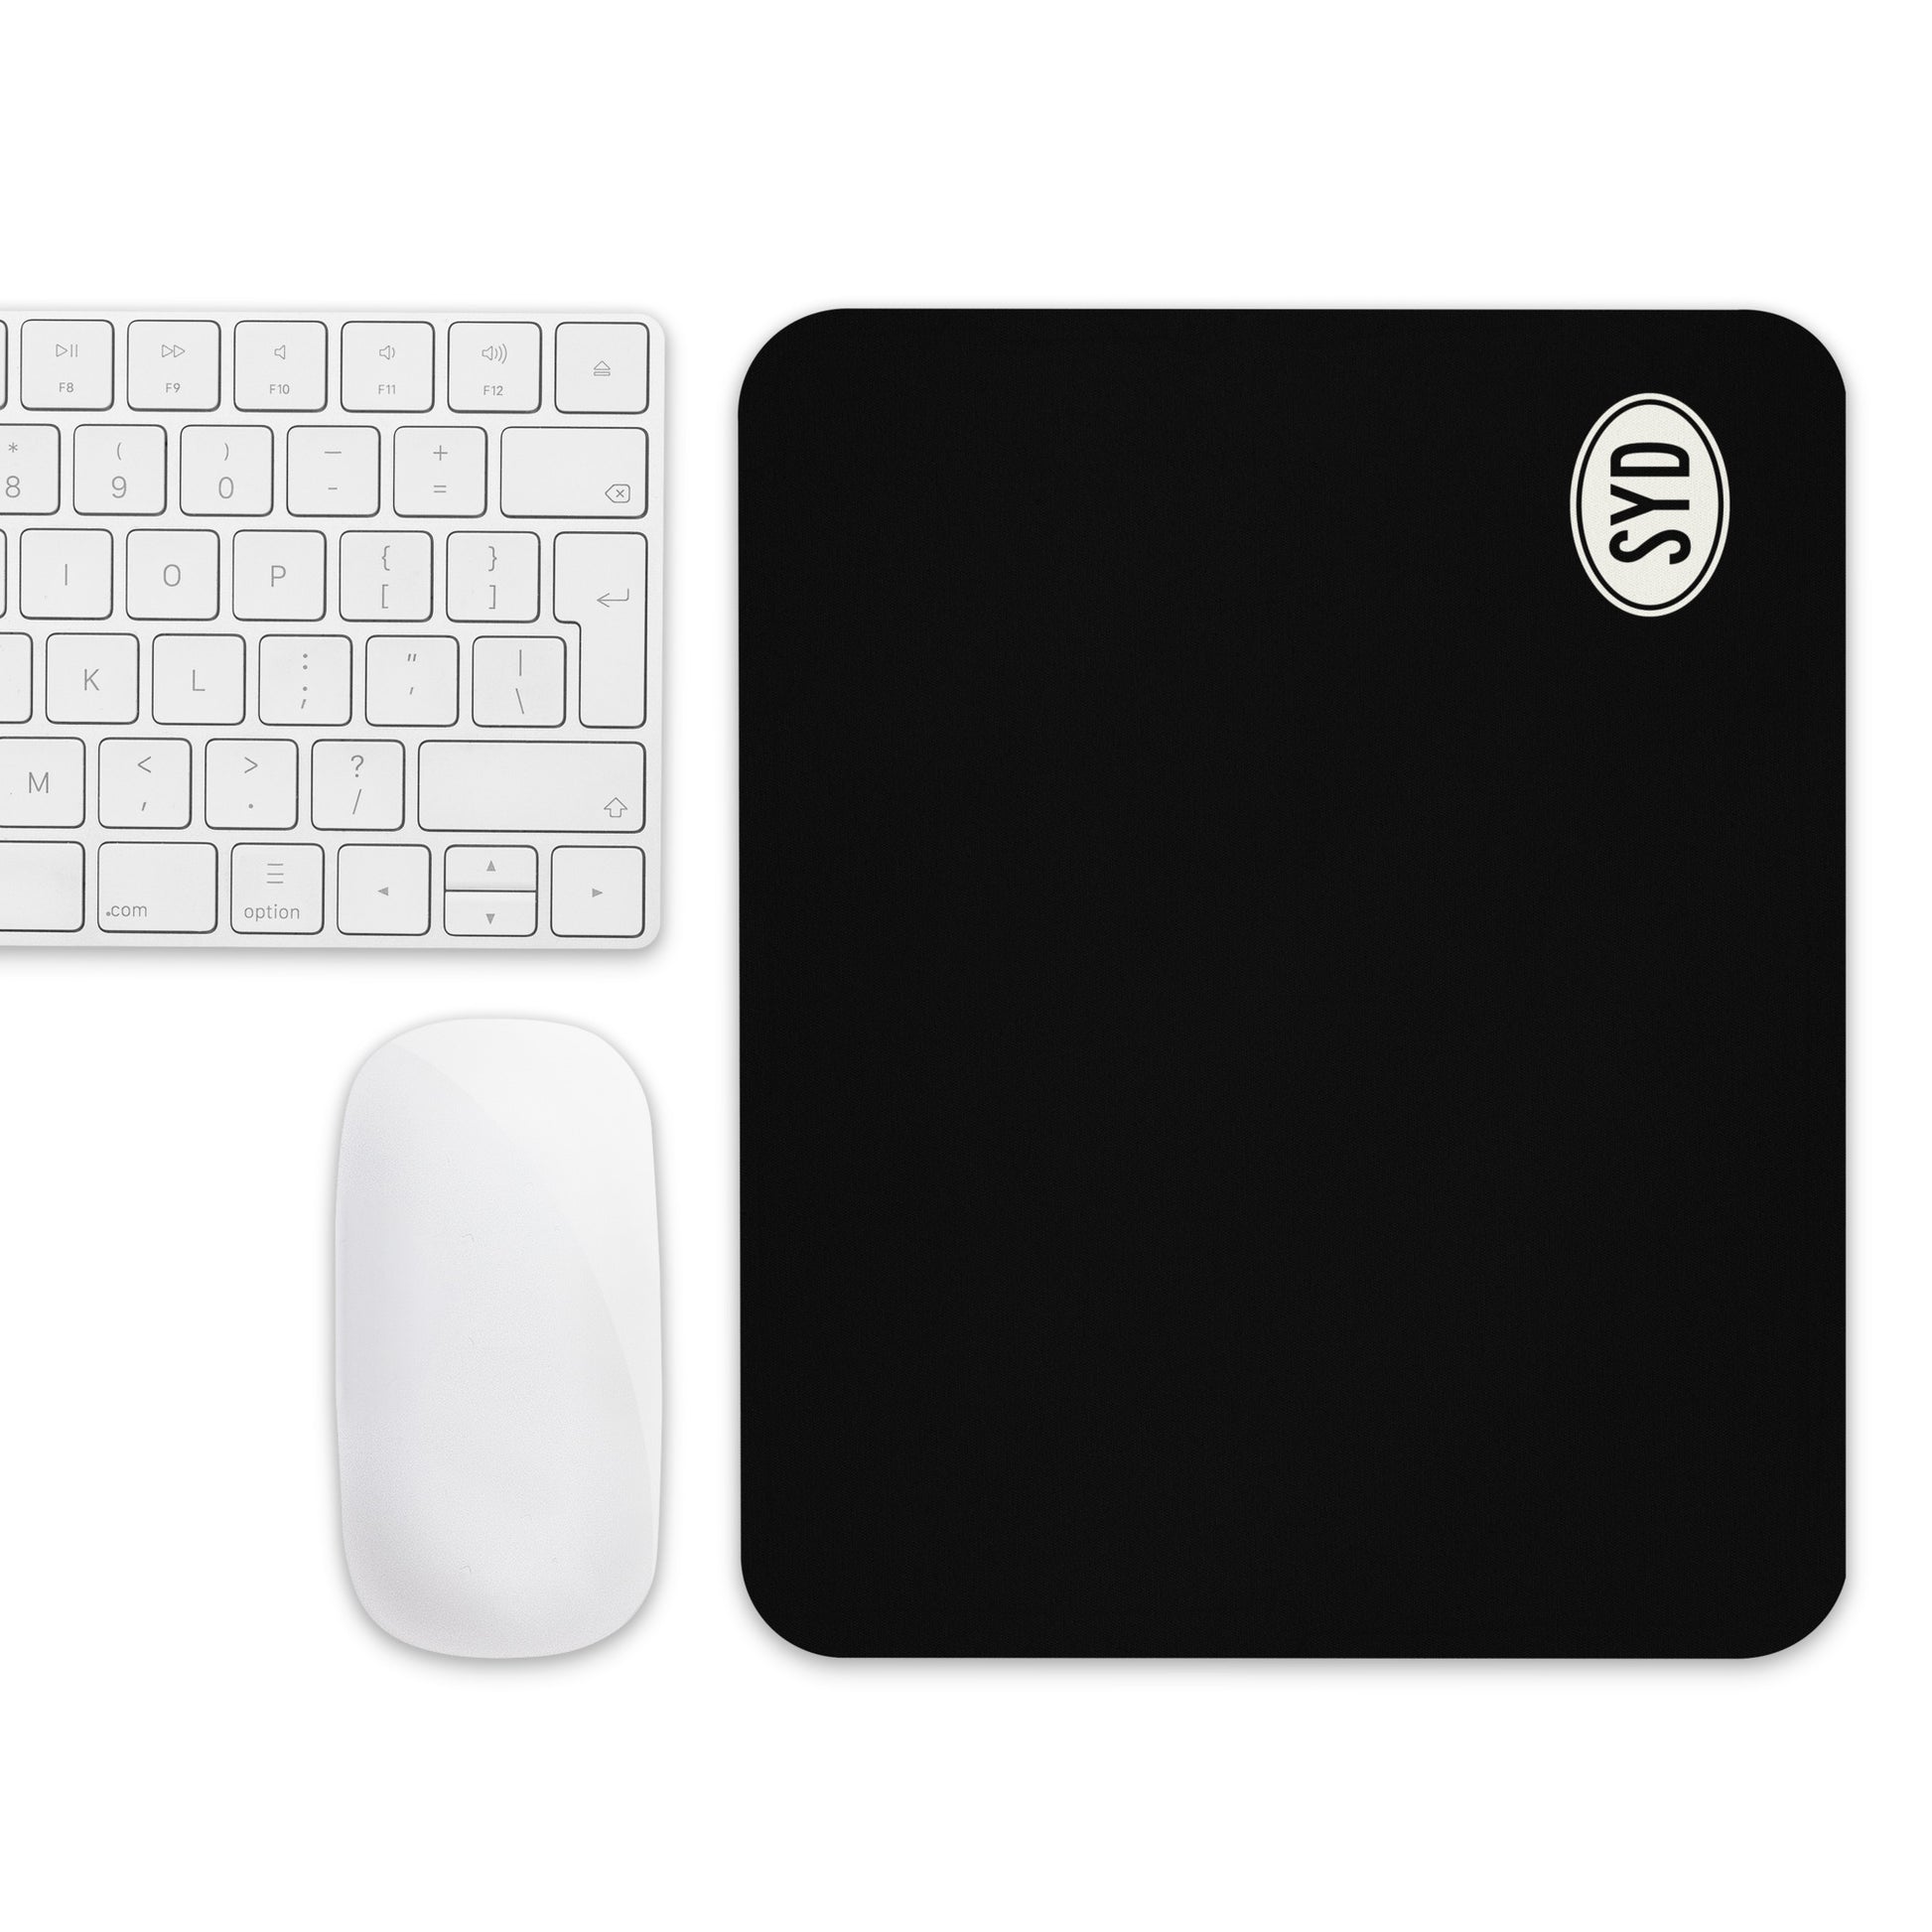 Unique Travel Gift Mouse Pad - White Oval • SYD Sydney • YHM Designs - Image 04